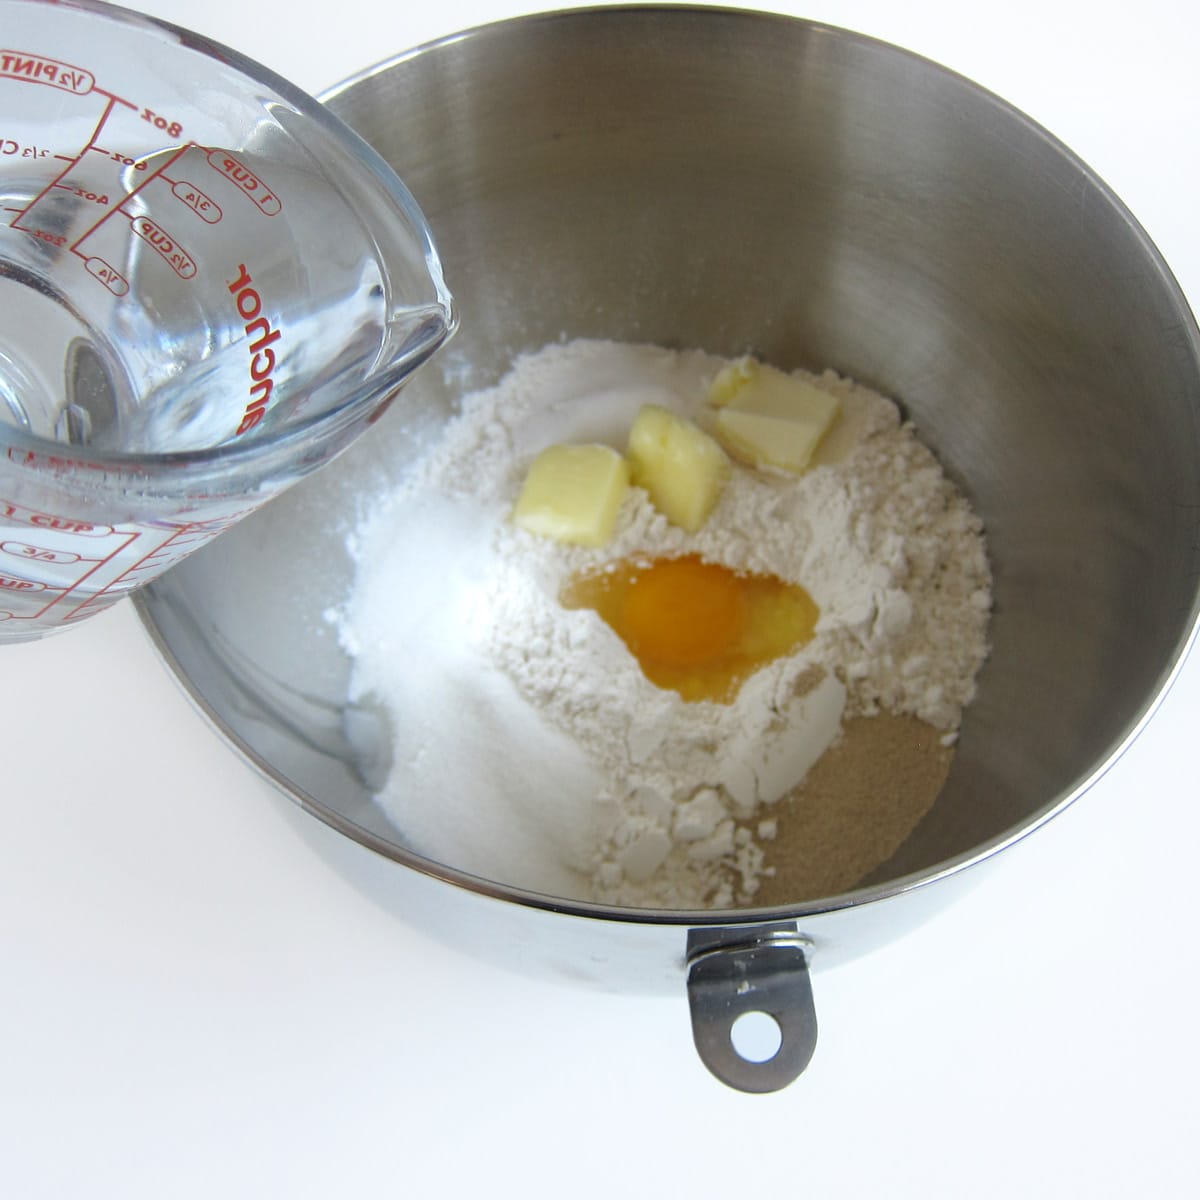 pouring water into a bowl filled with flour, yeast, sugar, salt, egg, and butter.